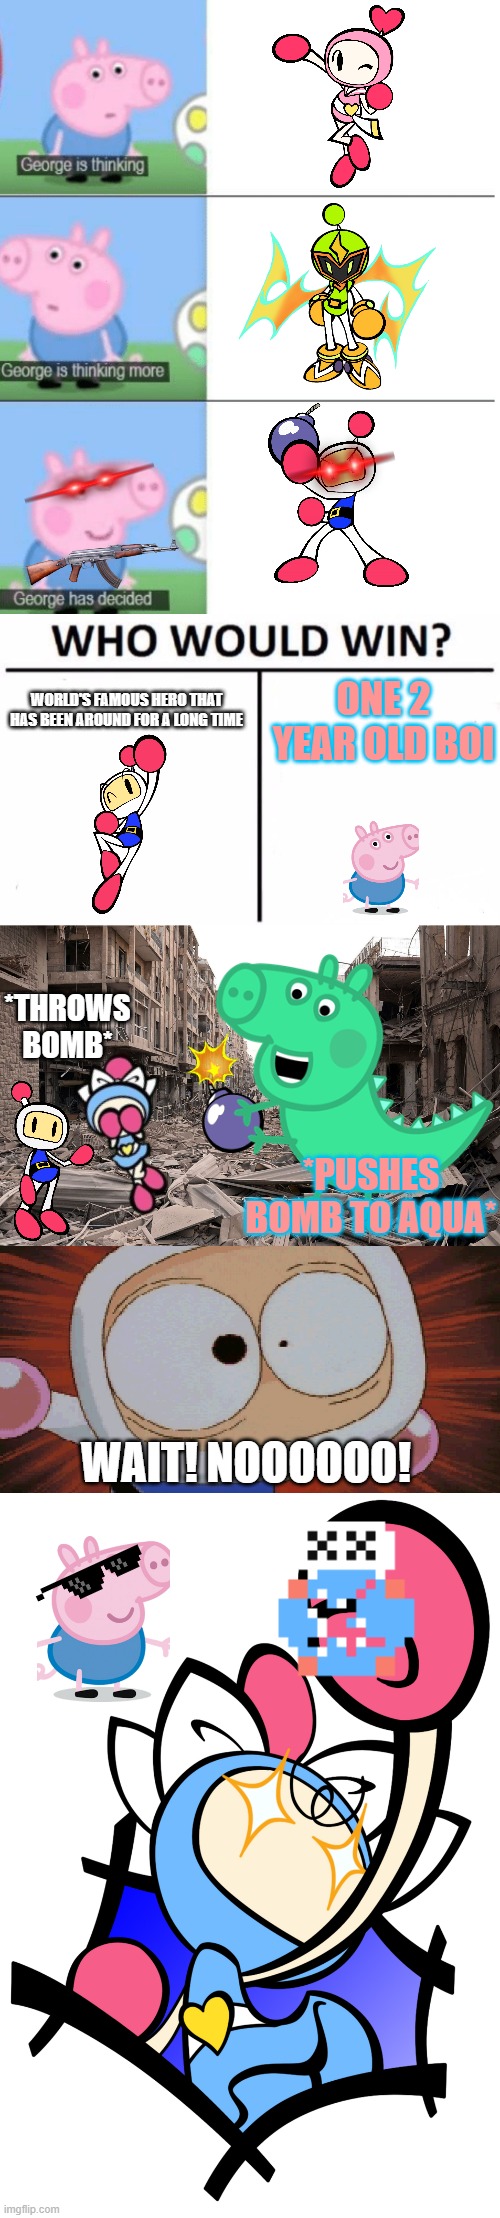 George Pig VS White Bomberman | WORLD'S FAMOUS HERO THAT HAS BEEN AROUND FOR A LONG TIME; ONE 2 YEAR OLD BOI; *THROWS BOMB*; *PUSHES BOMB TO AQUA*; WAIT! NOOOOOO! | image tagged in george is thinking,memes,who would win,bomberman | made w/ Imgflip meme maker